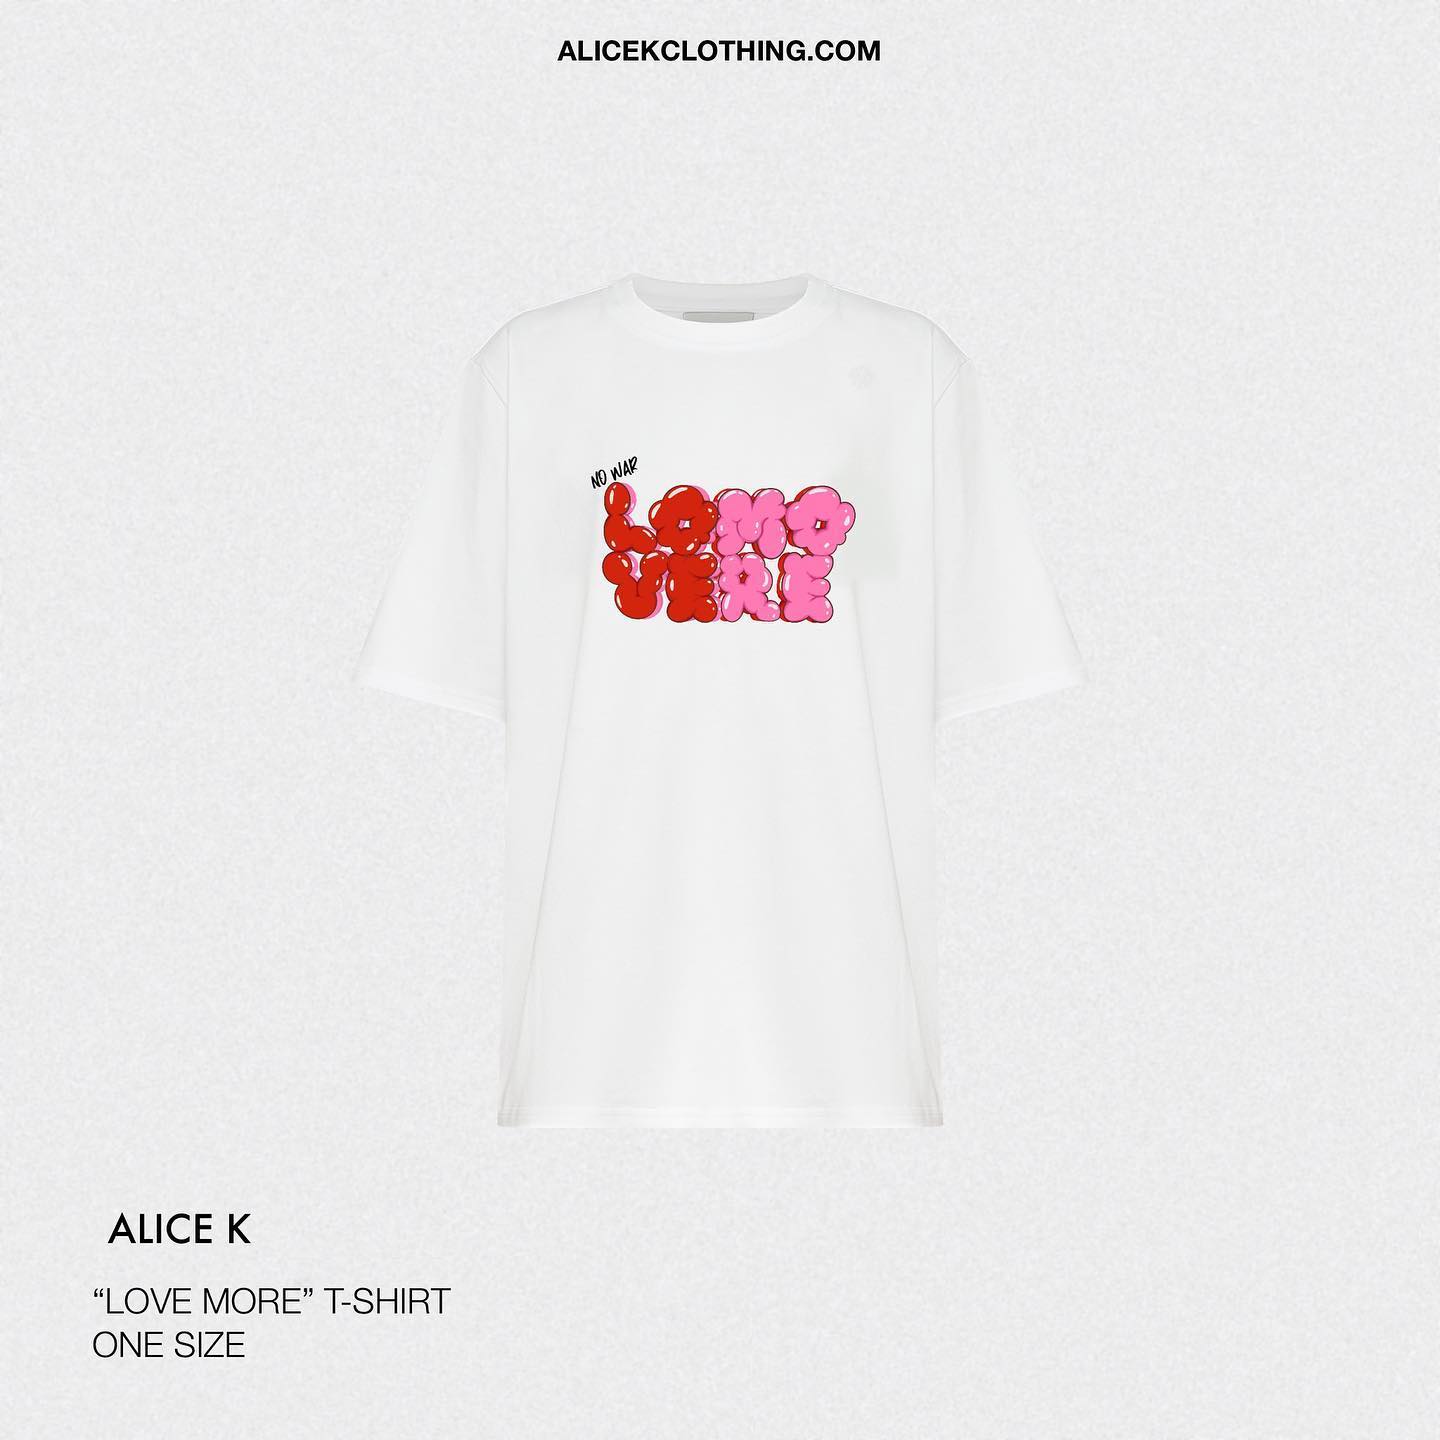 Photo by ALICE.K clothing on July 17, 2022. May be an image of text that says 'ALICEKCLOTHING.COM ND_WAR ALICE K "LOVE MORE" T-SHIRT ONE SIZE'.